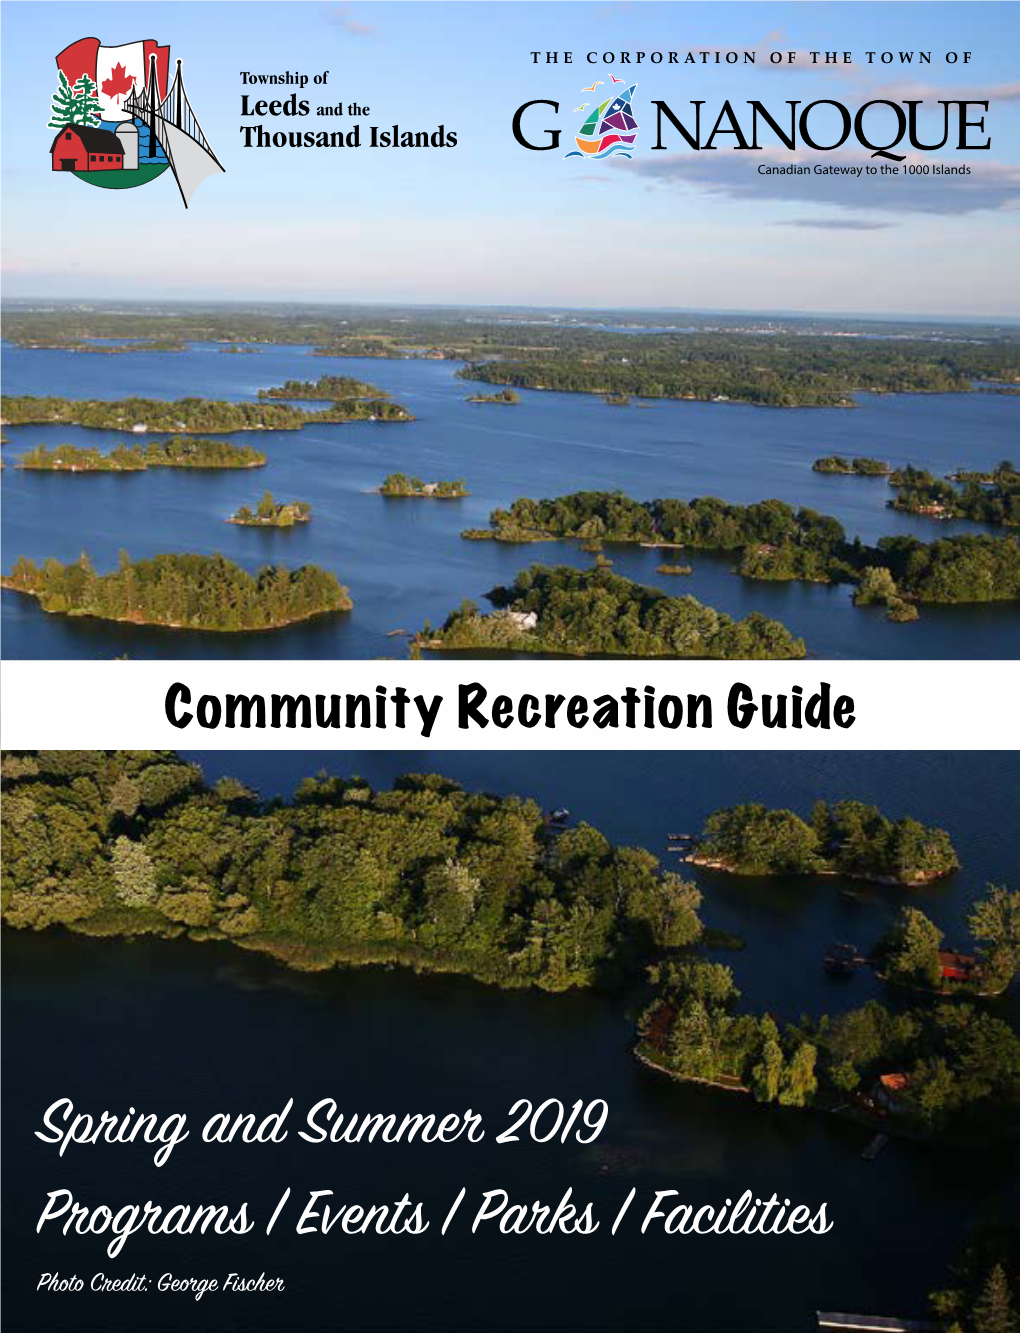 Spring and Summer 2019 Programs | Events | Parks